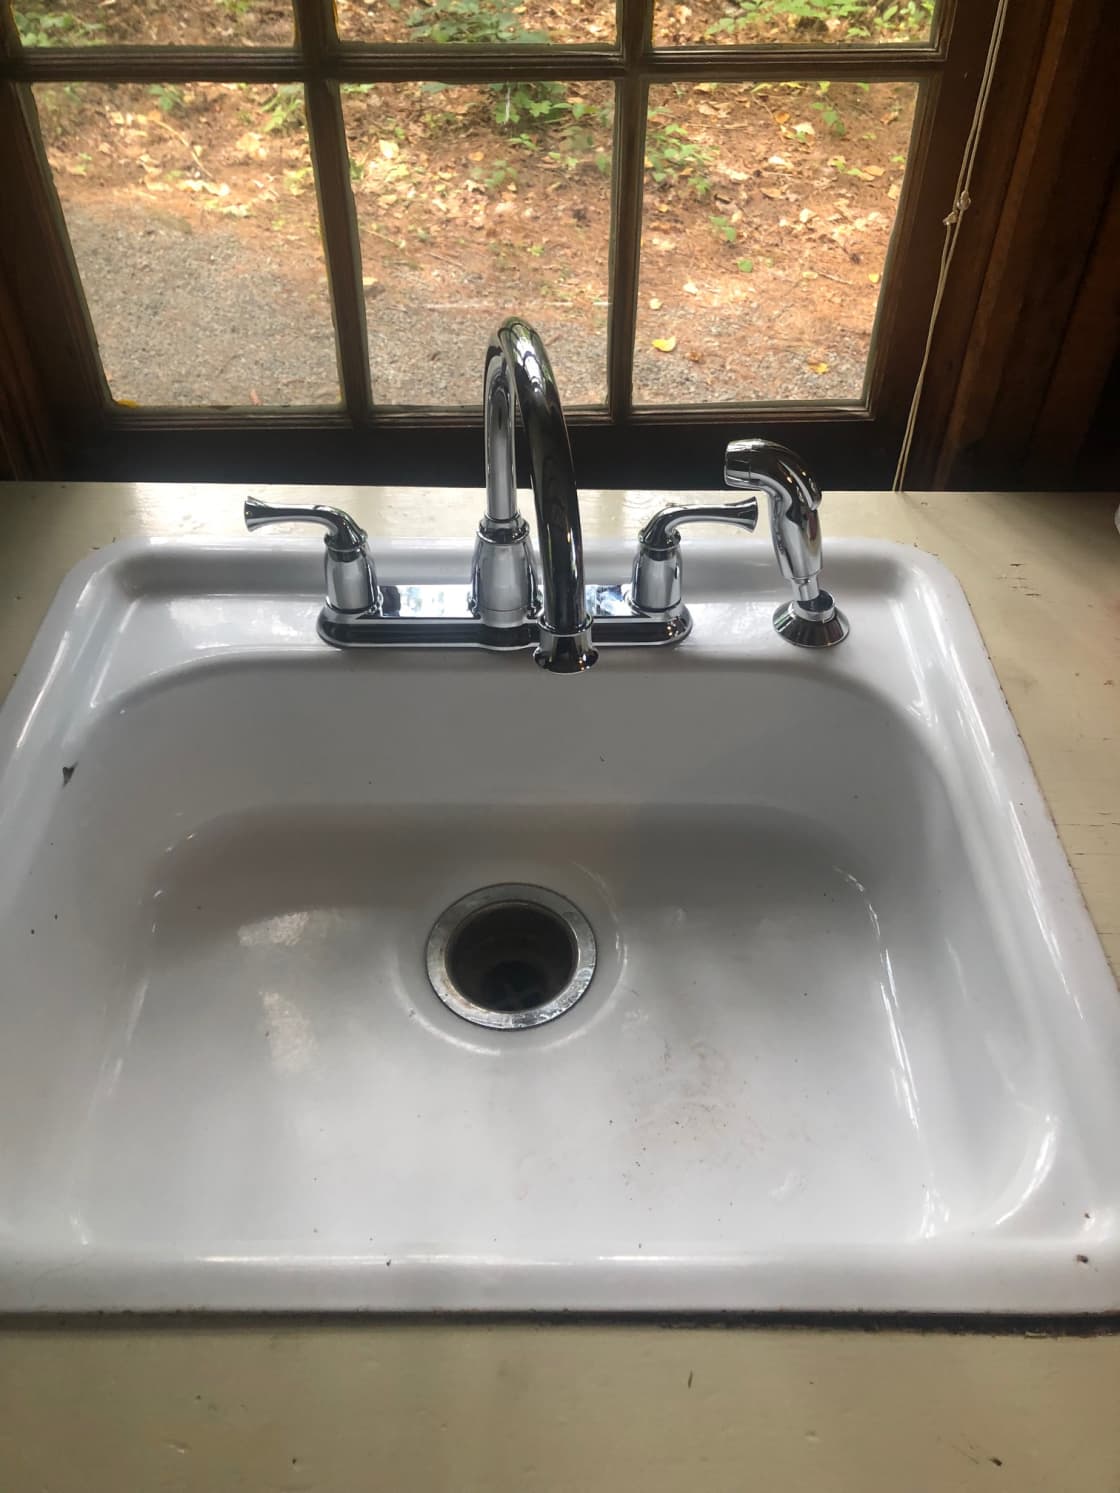 New in August '20!  A real faucet with cold AND hot water at the kitchen sink.  We are hauling water in by truck so we ask that everyone CONSERVE :)